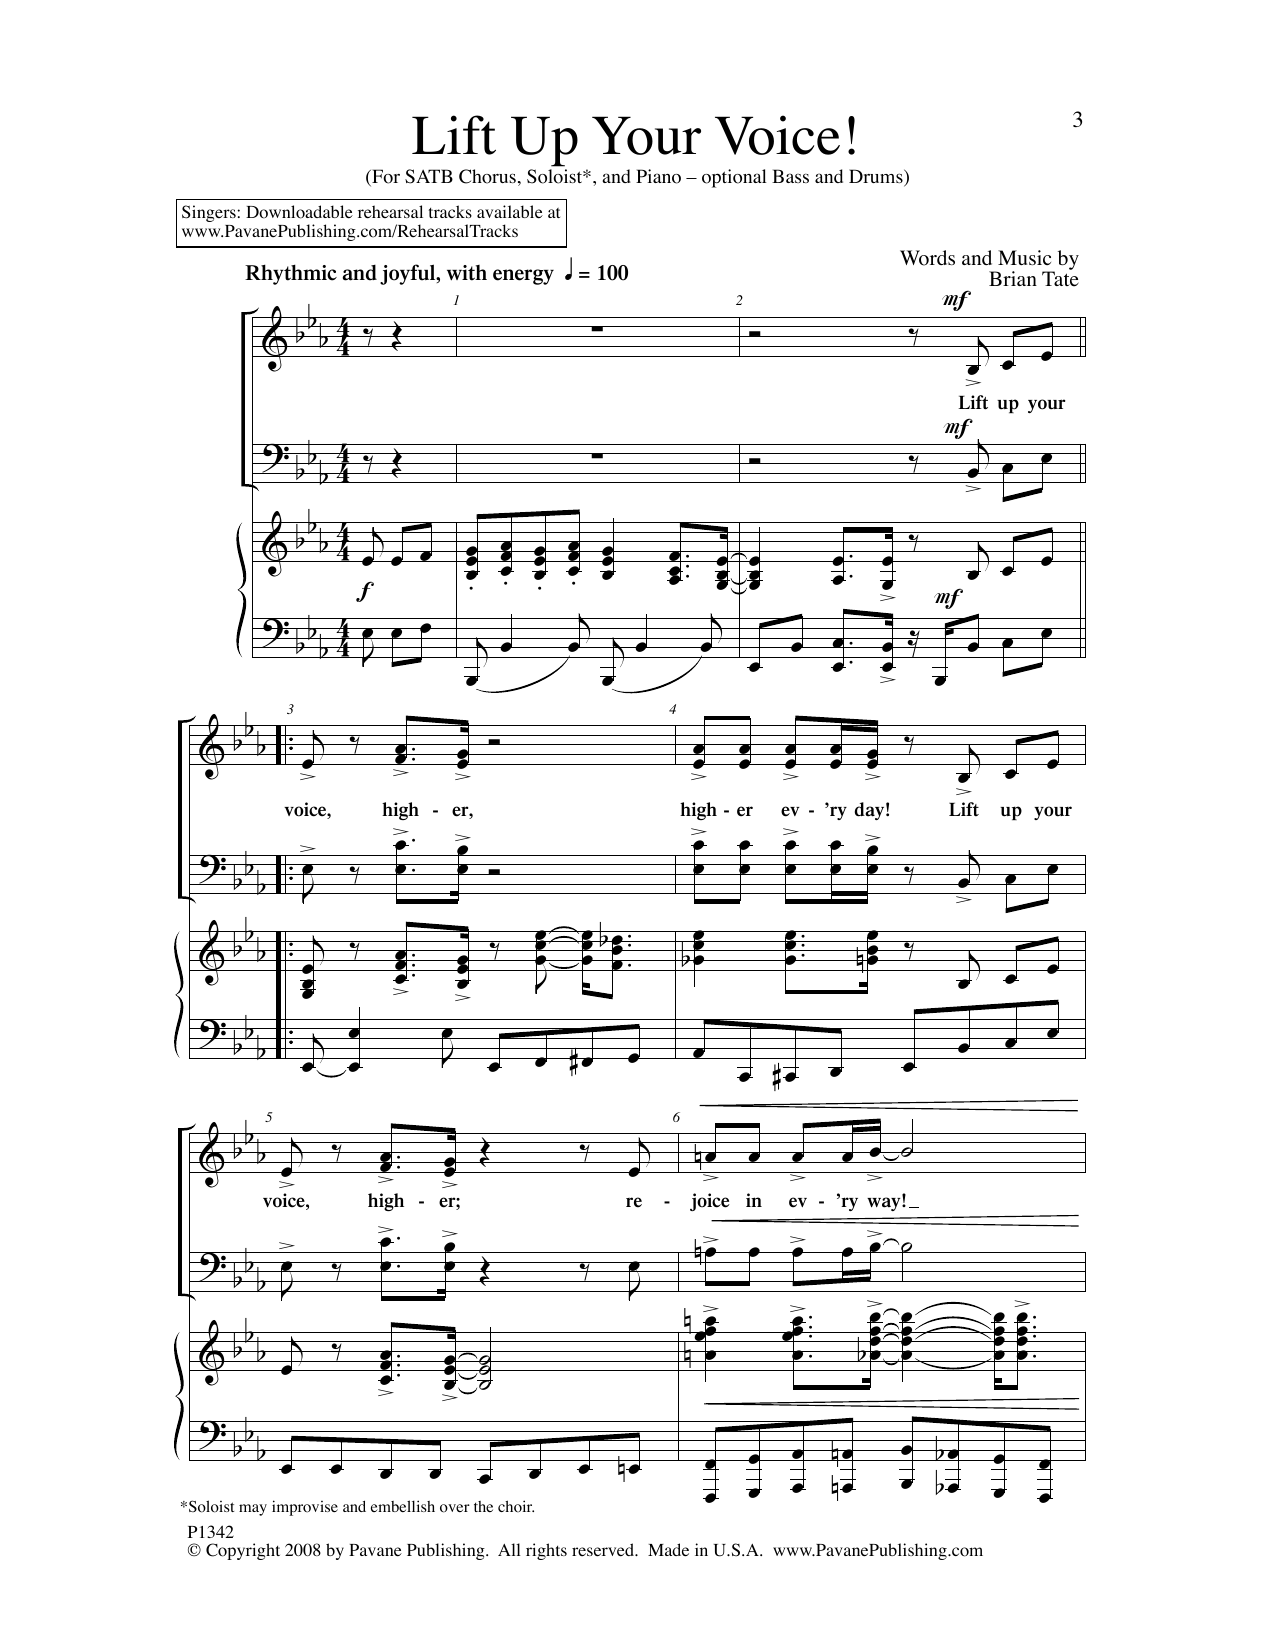 Download Brian Tate Lift Up Your Voice! Sheet Music